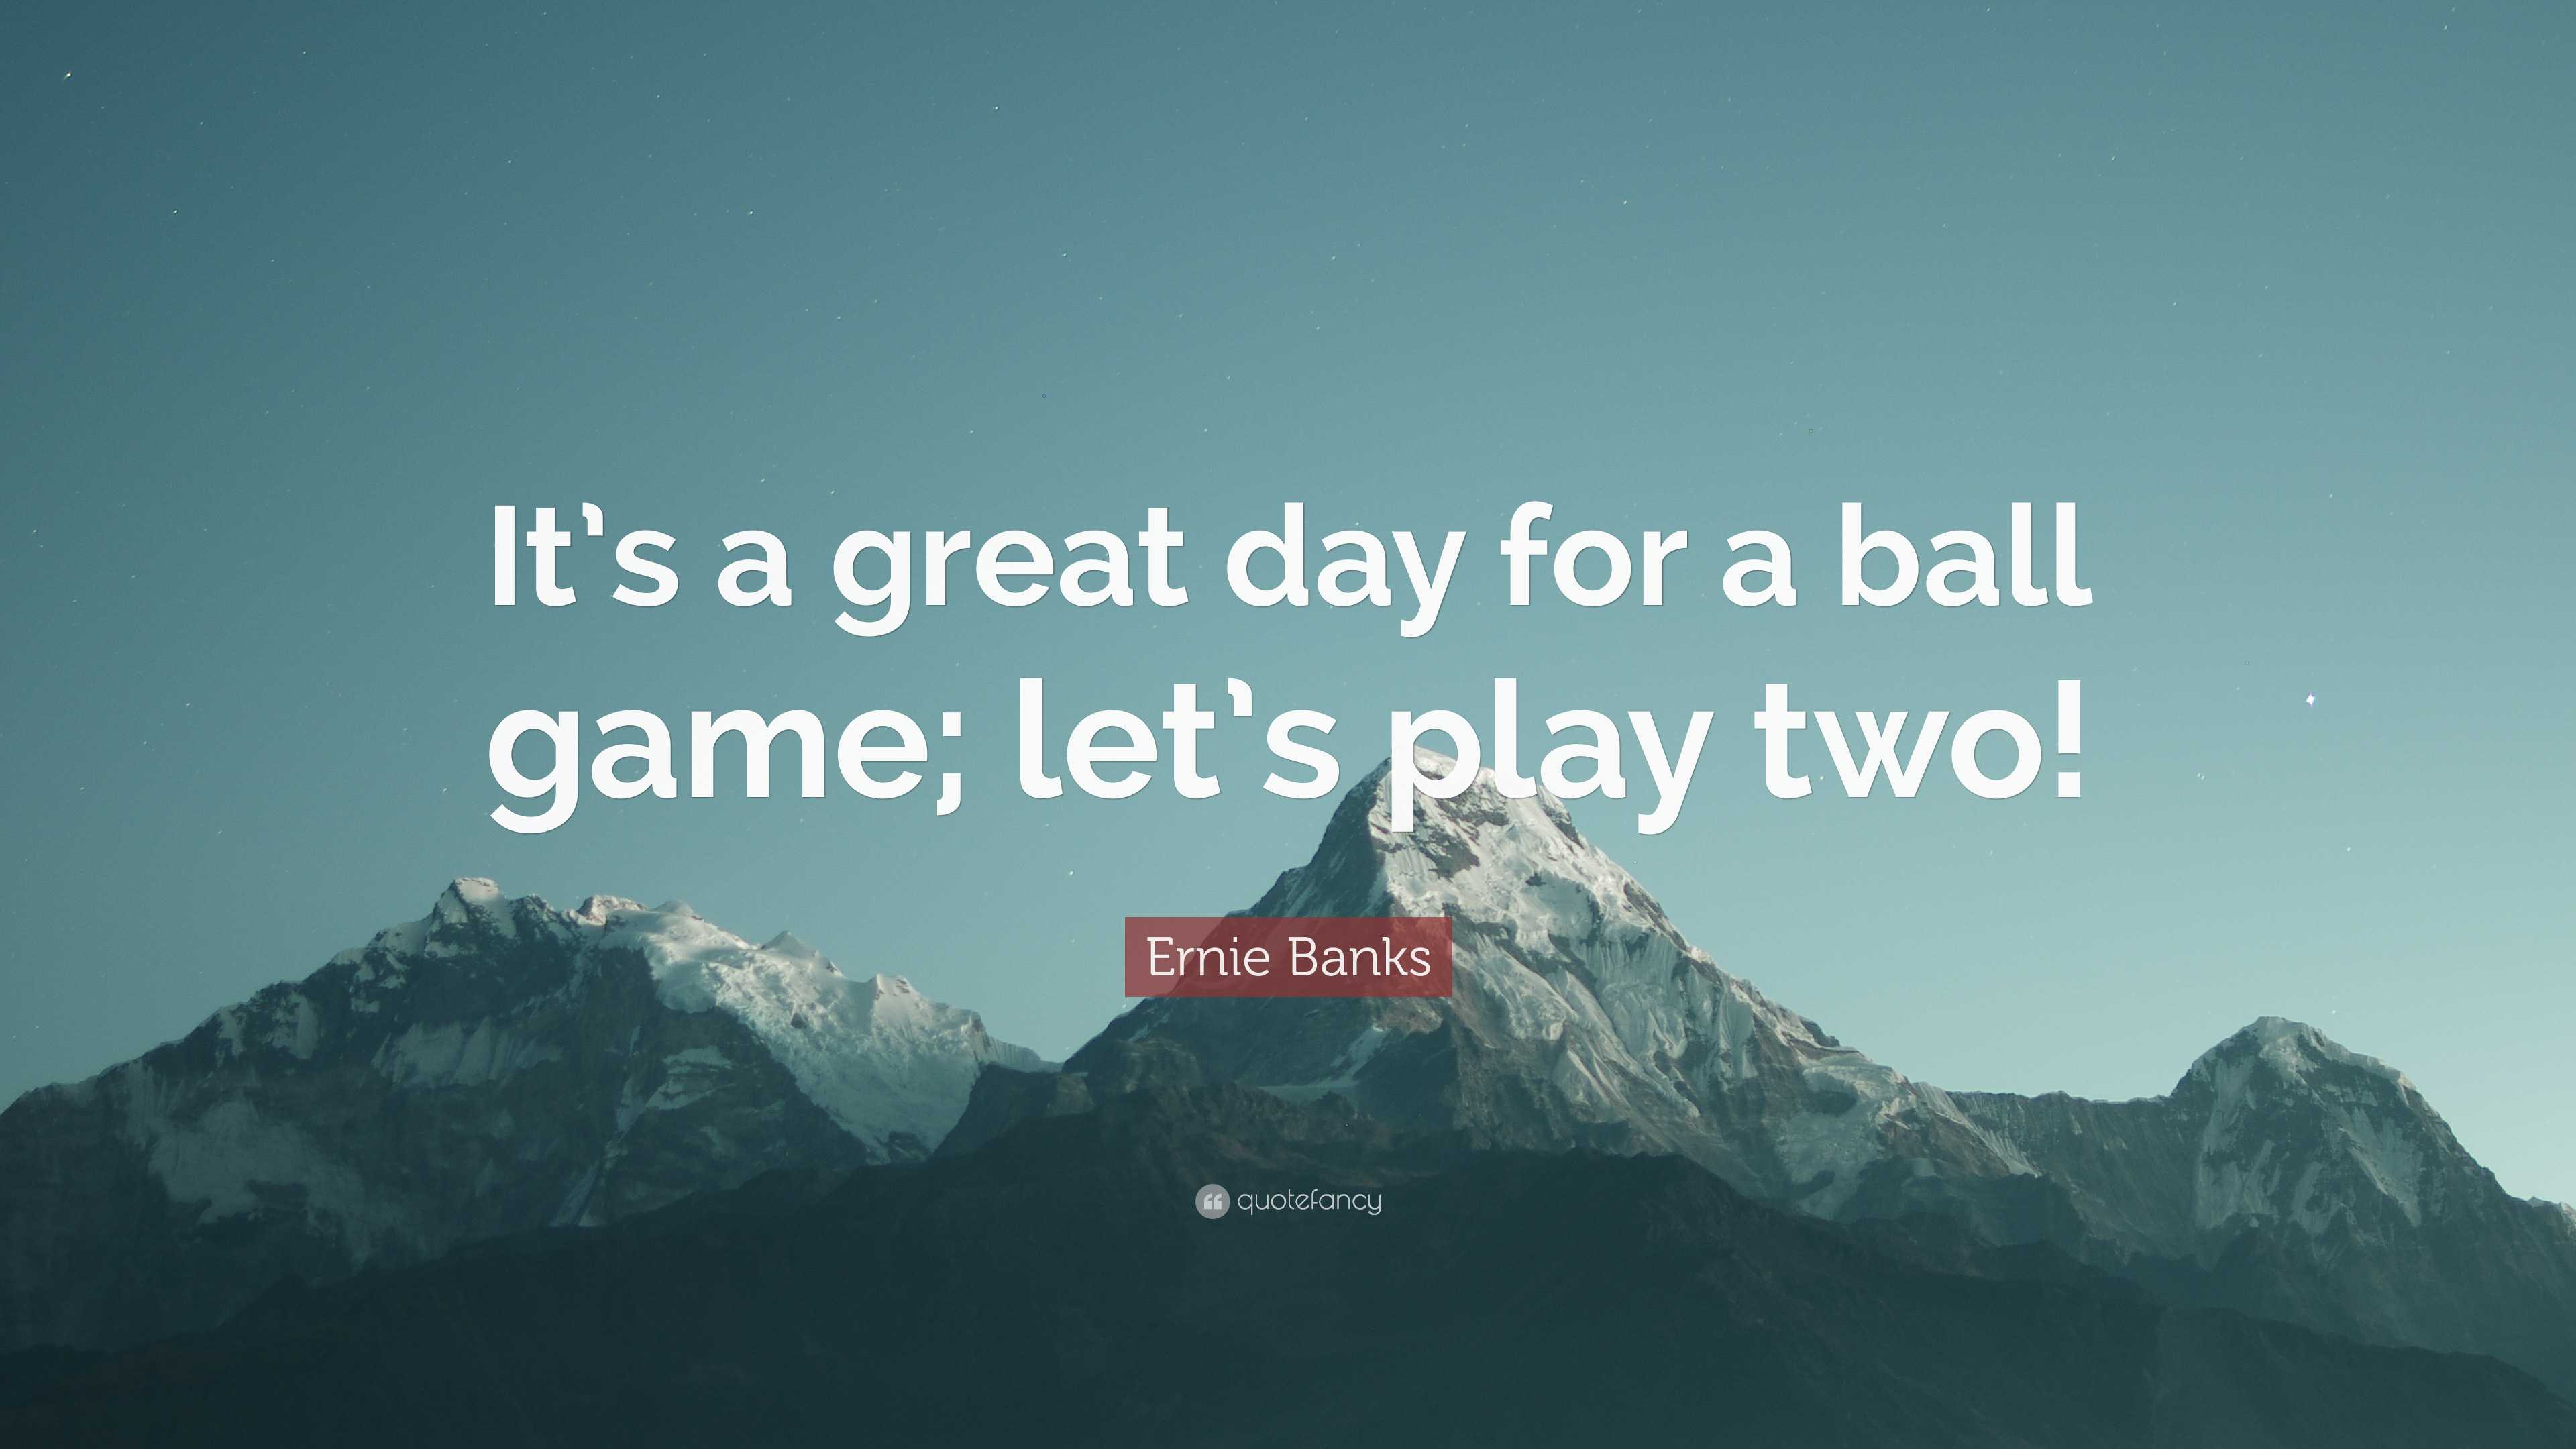 Ernie Banks Quote: “It's a great day for a ball game; let's play two!”